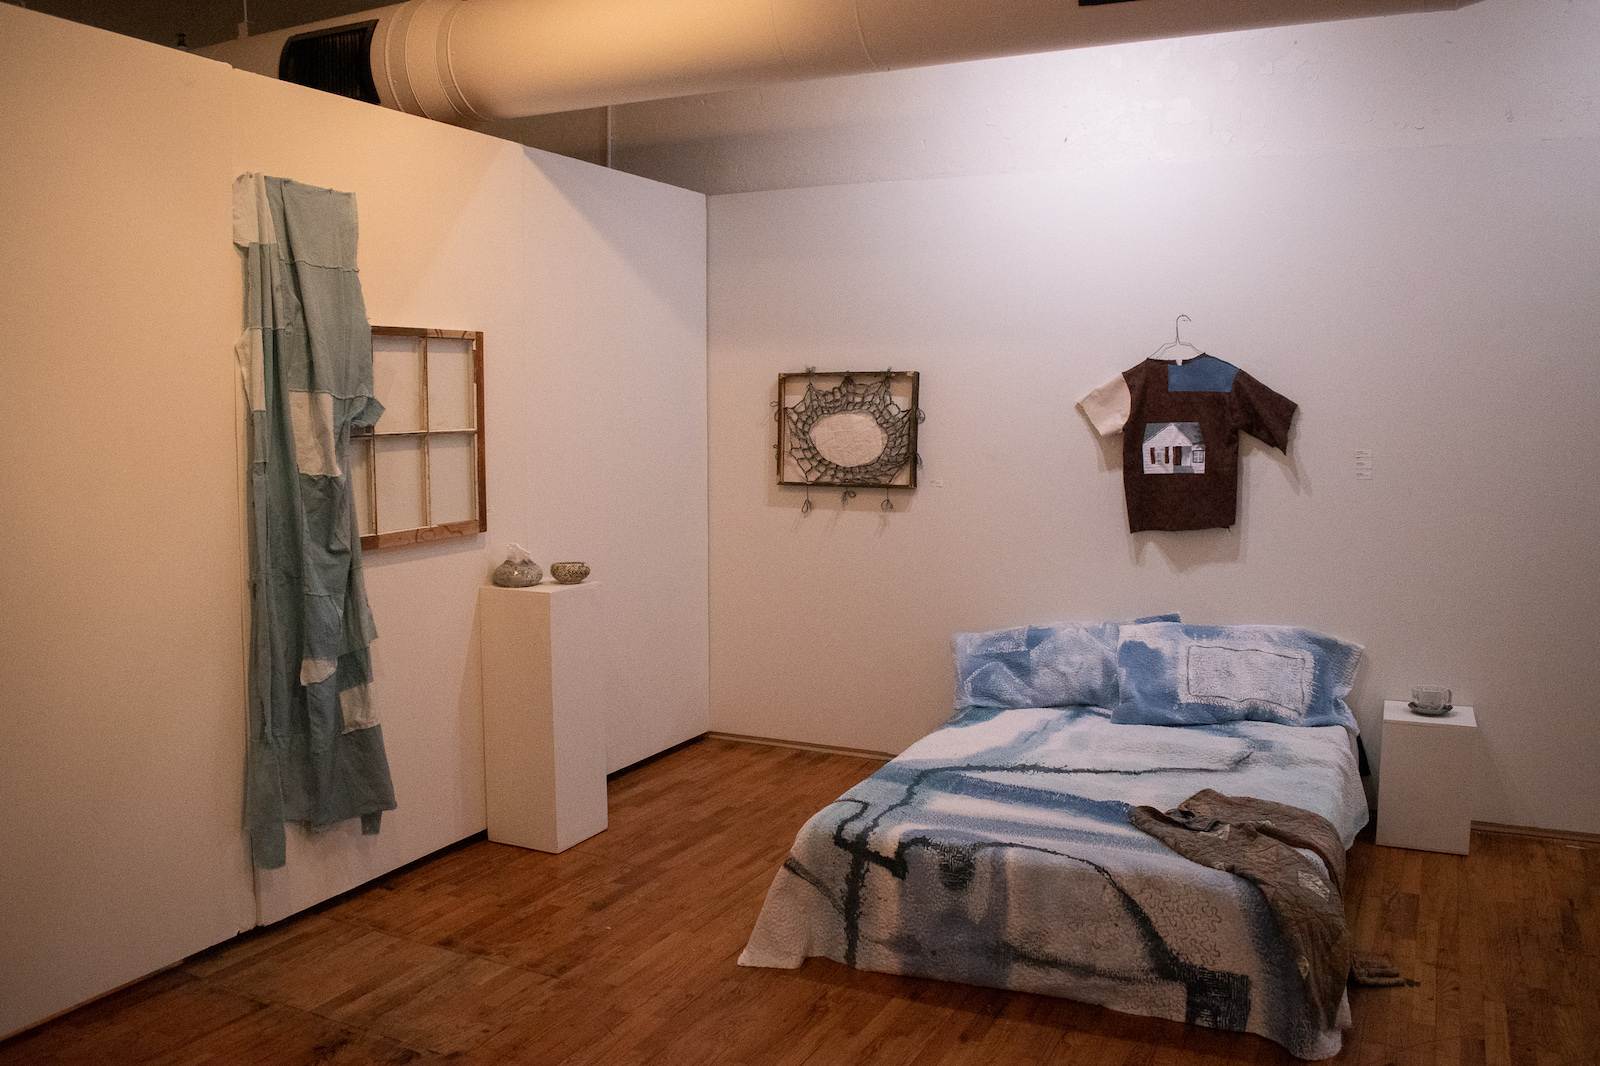 A bedroom set up in an art gallery, including a bed, a glass-less window frame, and a shirt on a hanger on the wall